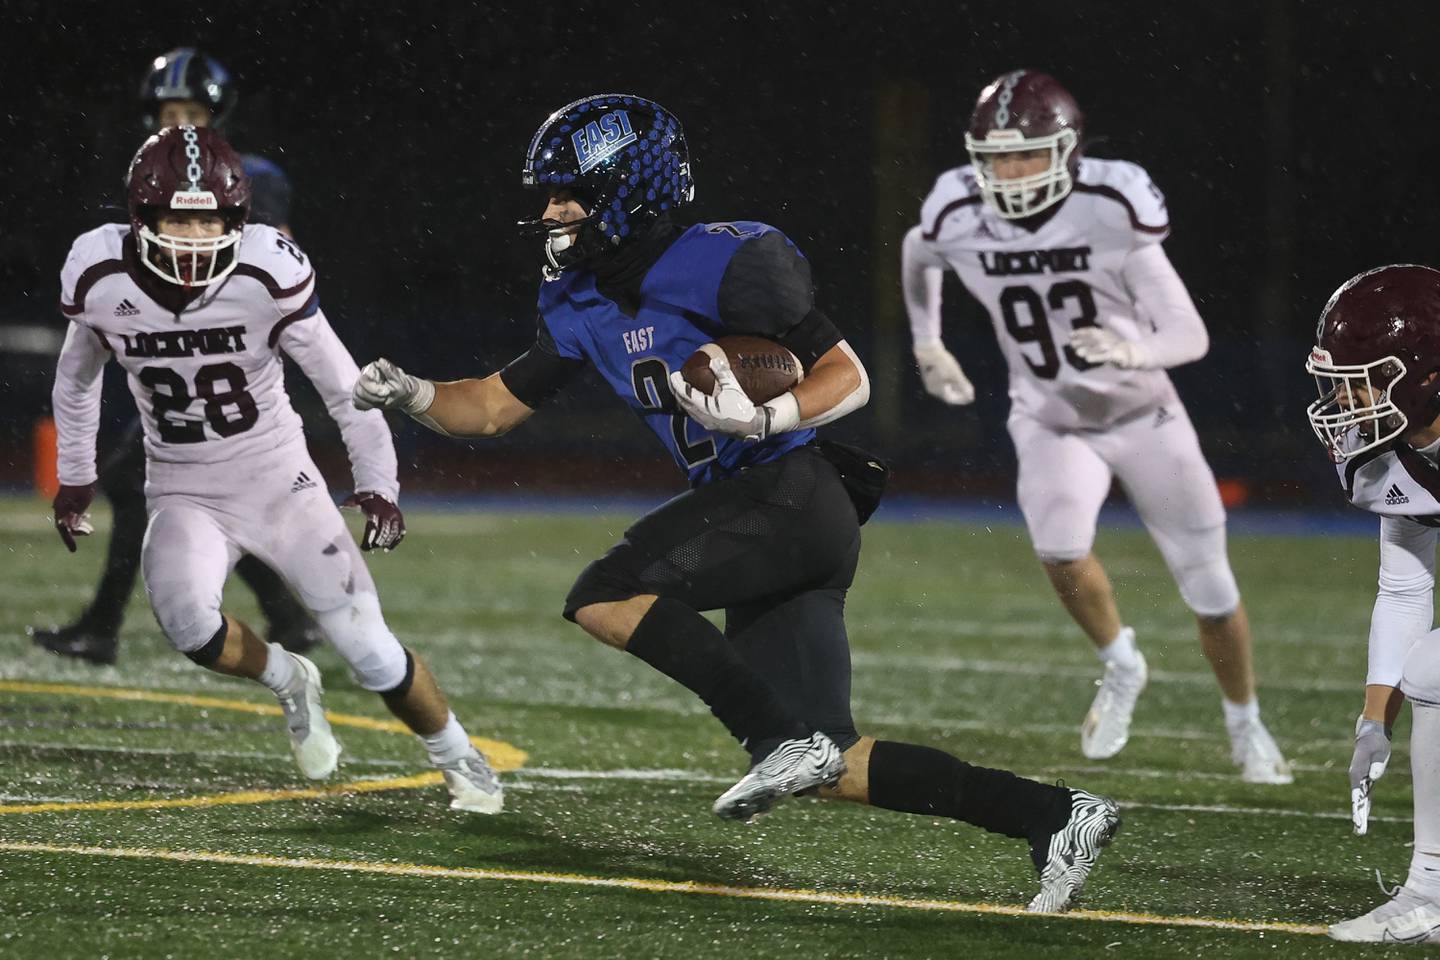 Lincoln-Way East’s James Kwiecinski cuts across the field on a run against Lockport Friday night.